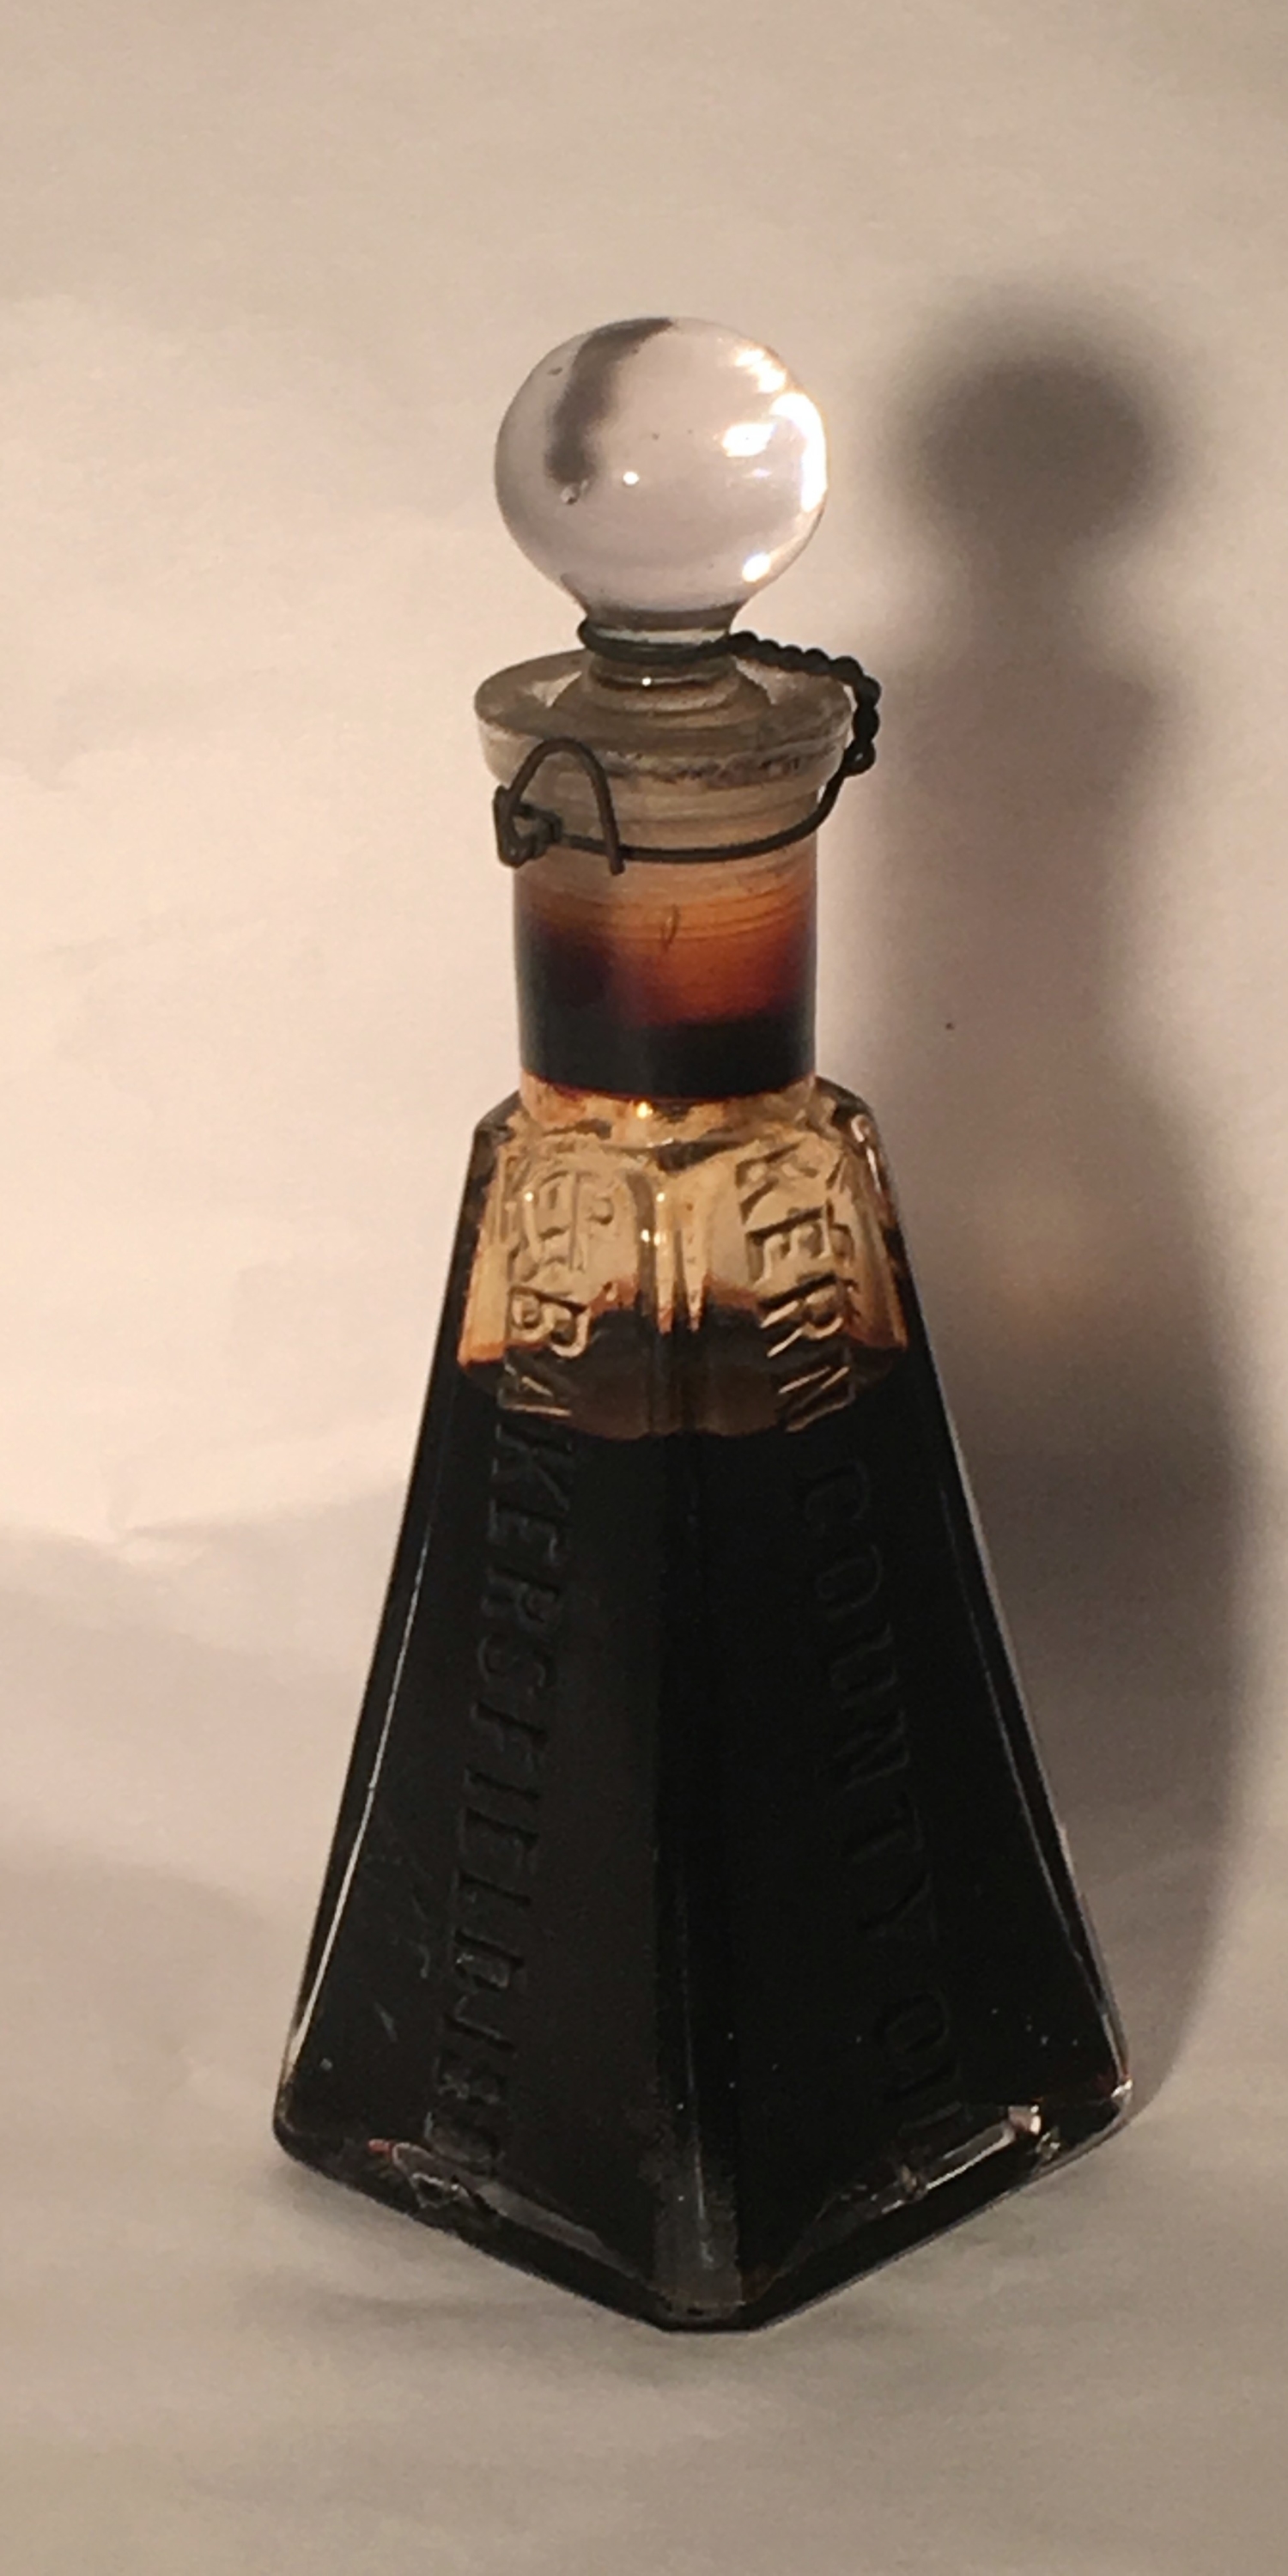 A four sided glass jar with a stopper filled with black oil.